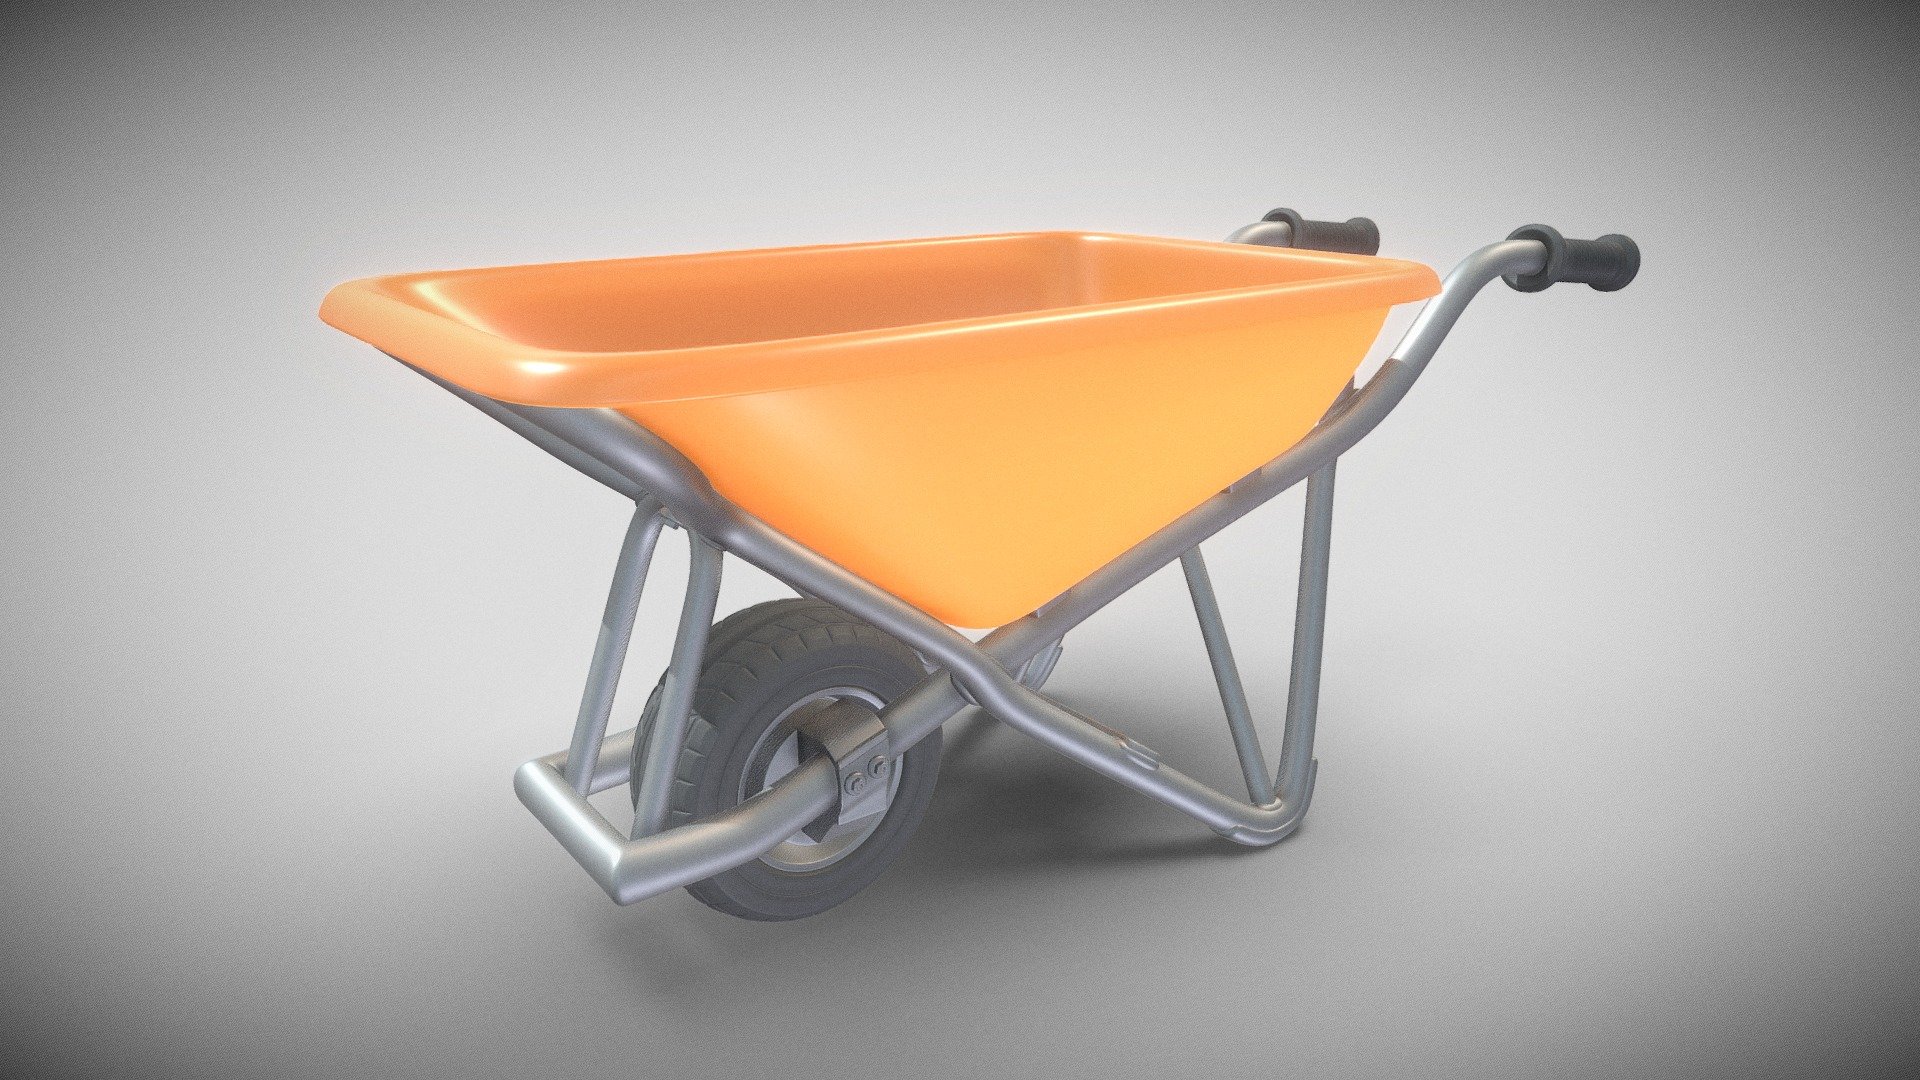 Here is the high-poly version of wheelbarrow 1.




Object Name - Wheelbarrow_Not_Rigged  

Object Dimensions -  0.680m x 1.641m x 0.720m

Vertices = 549348

Edges = 1098510

Polygons = 549228



3D model formats: 




Native format (*.blend)

Autodesk FBX (.fbx)

OBJ (.obj, .mtl)

glTF (.gltf, .glb)

X3D (.x3d)

Collada (.dae)

Stereolithography (.stl)

Polygon File Format (.ply)

Alembic (.abc)

DXF (.dxf)

USDC







Modeled by 3DHaupt in Blender-2.90.1 - Wheelbarrow 1 (High-Poly Version) - Buy Royalty Free 3D model by VIS-All-3D (@VIS-All) 3d model